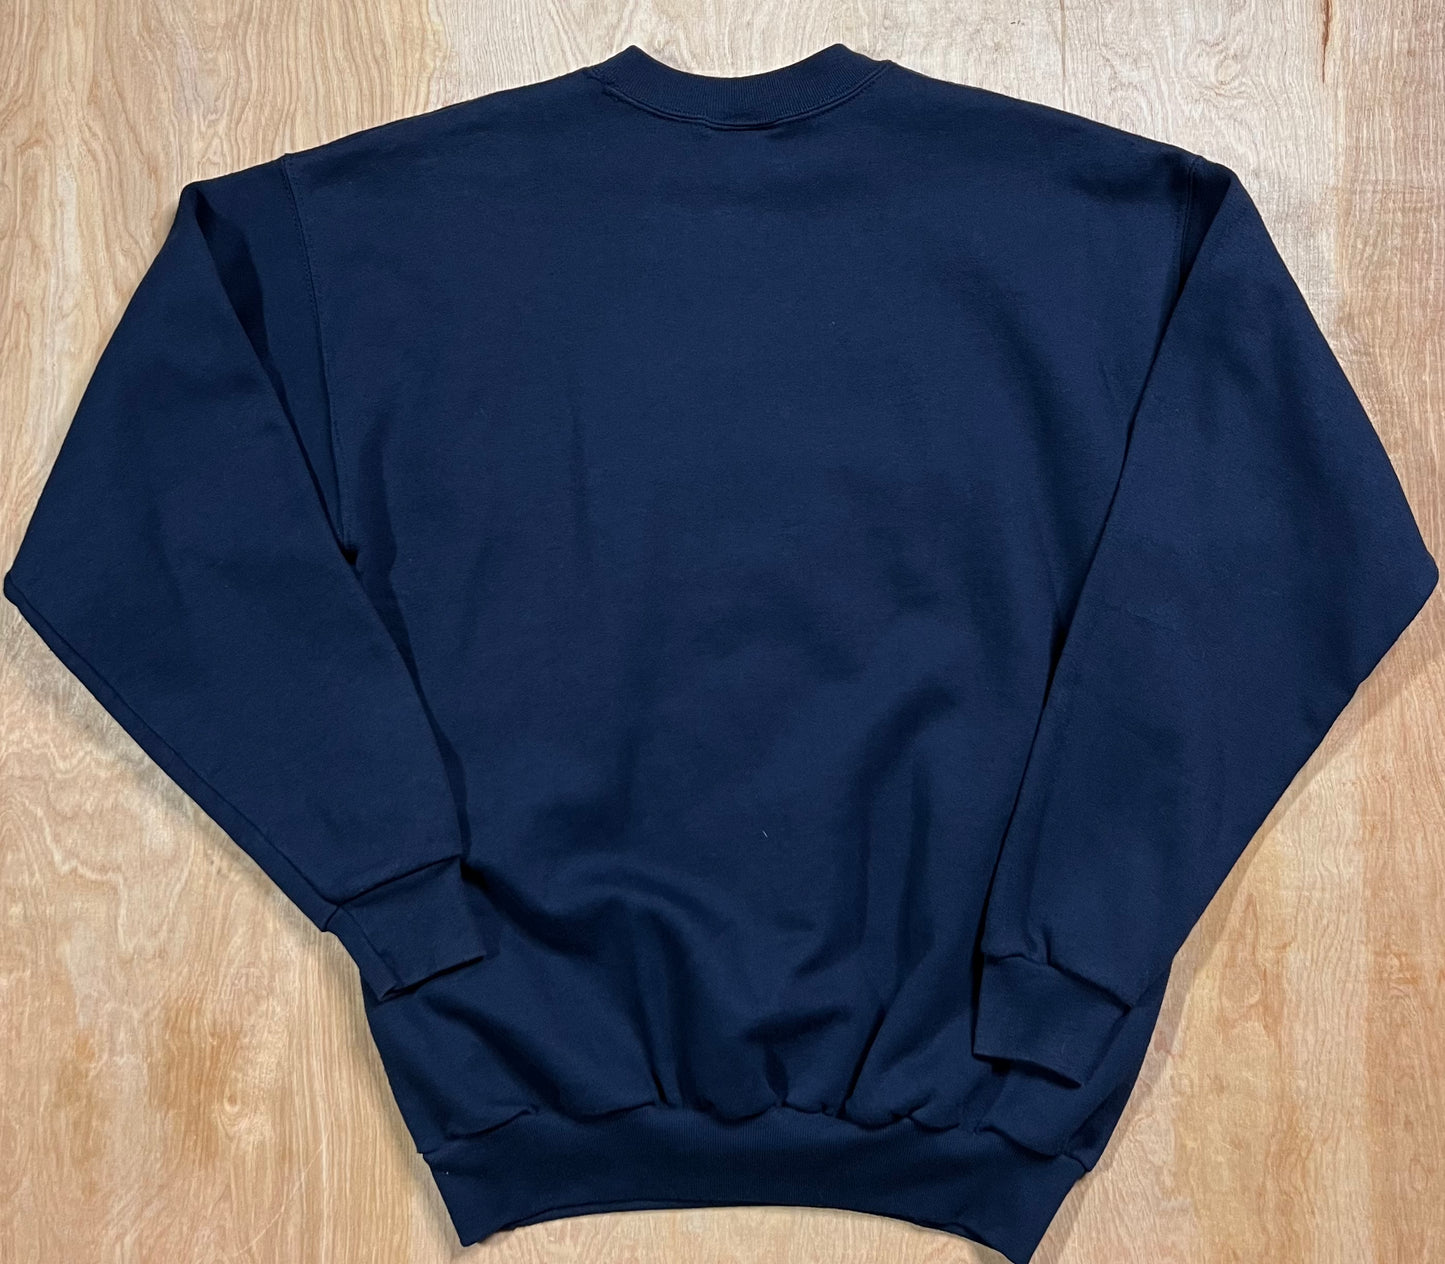 1990's "This Is What A Great Golfer Looks Like" Crewneck